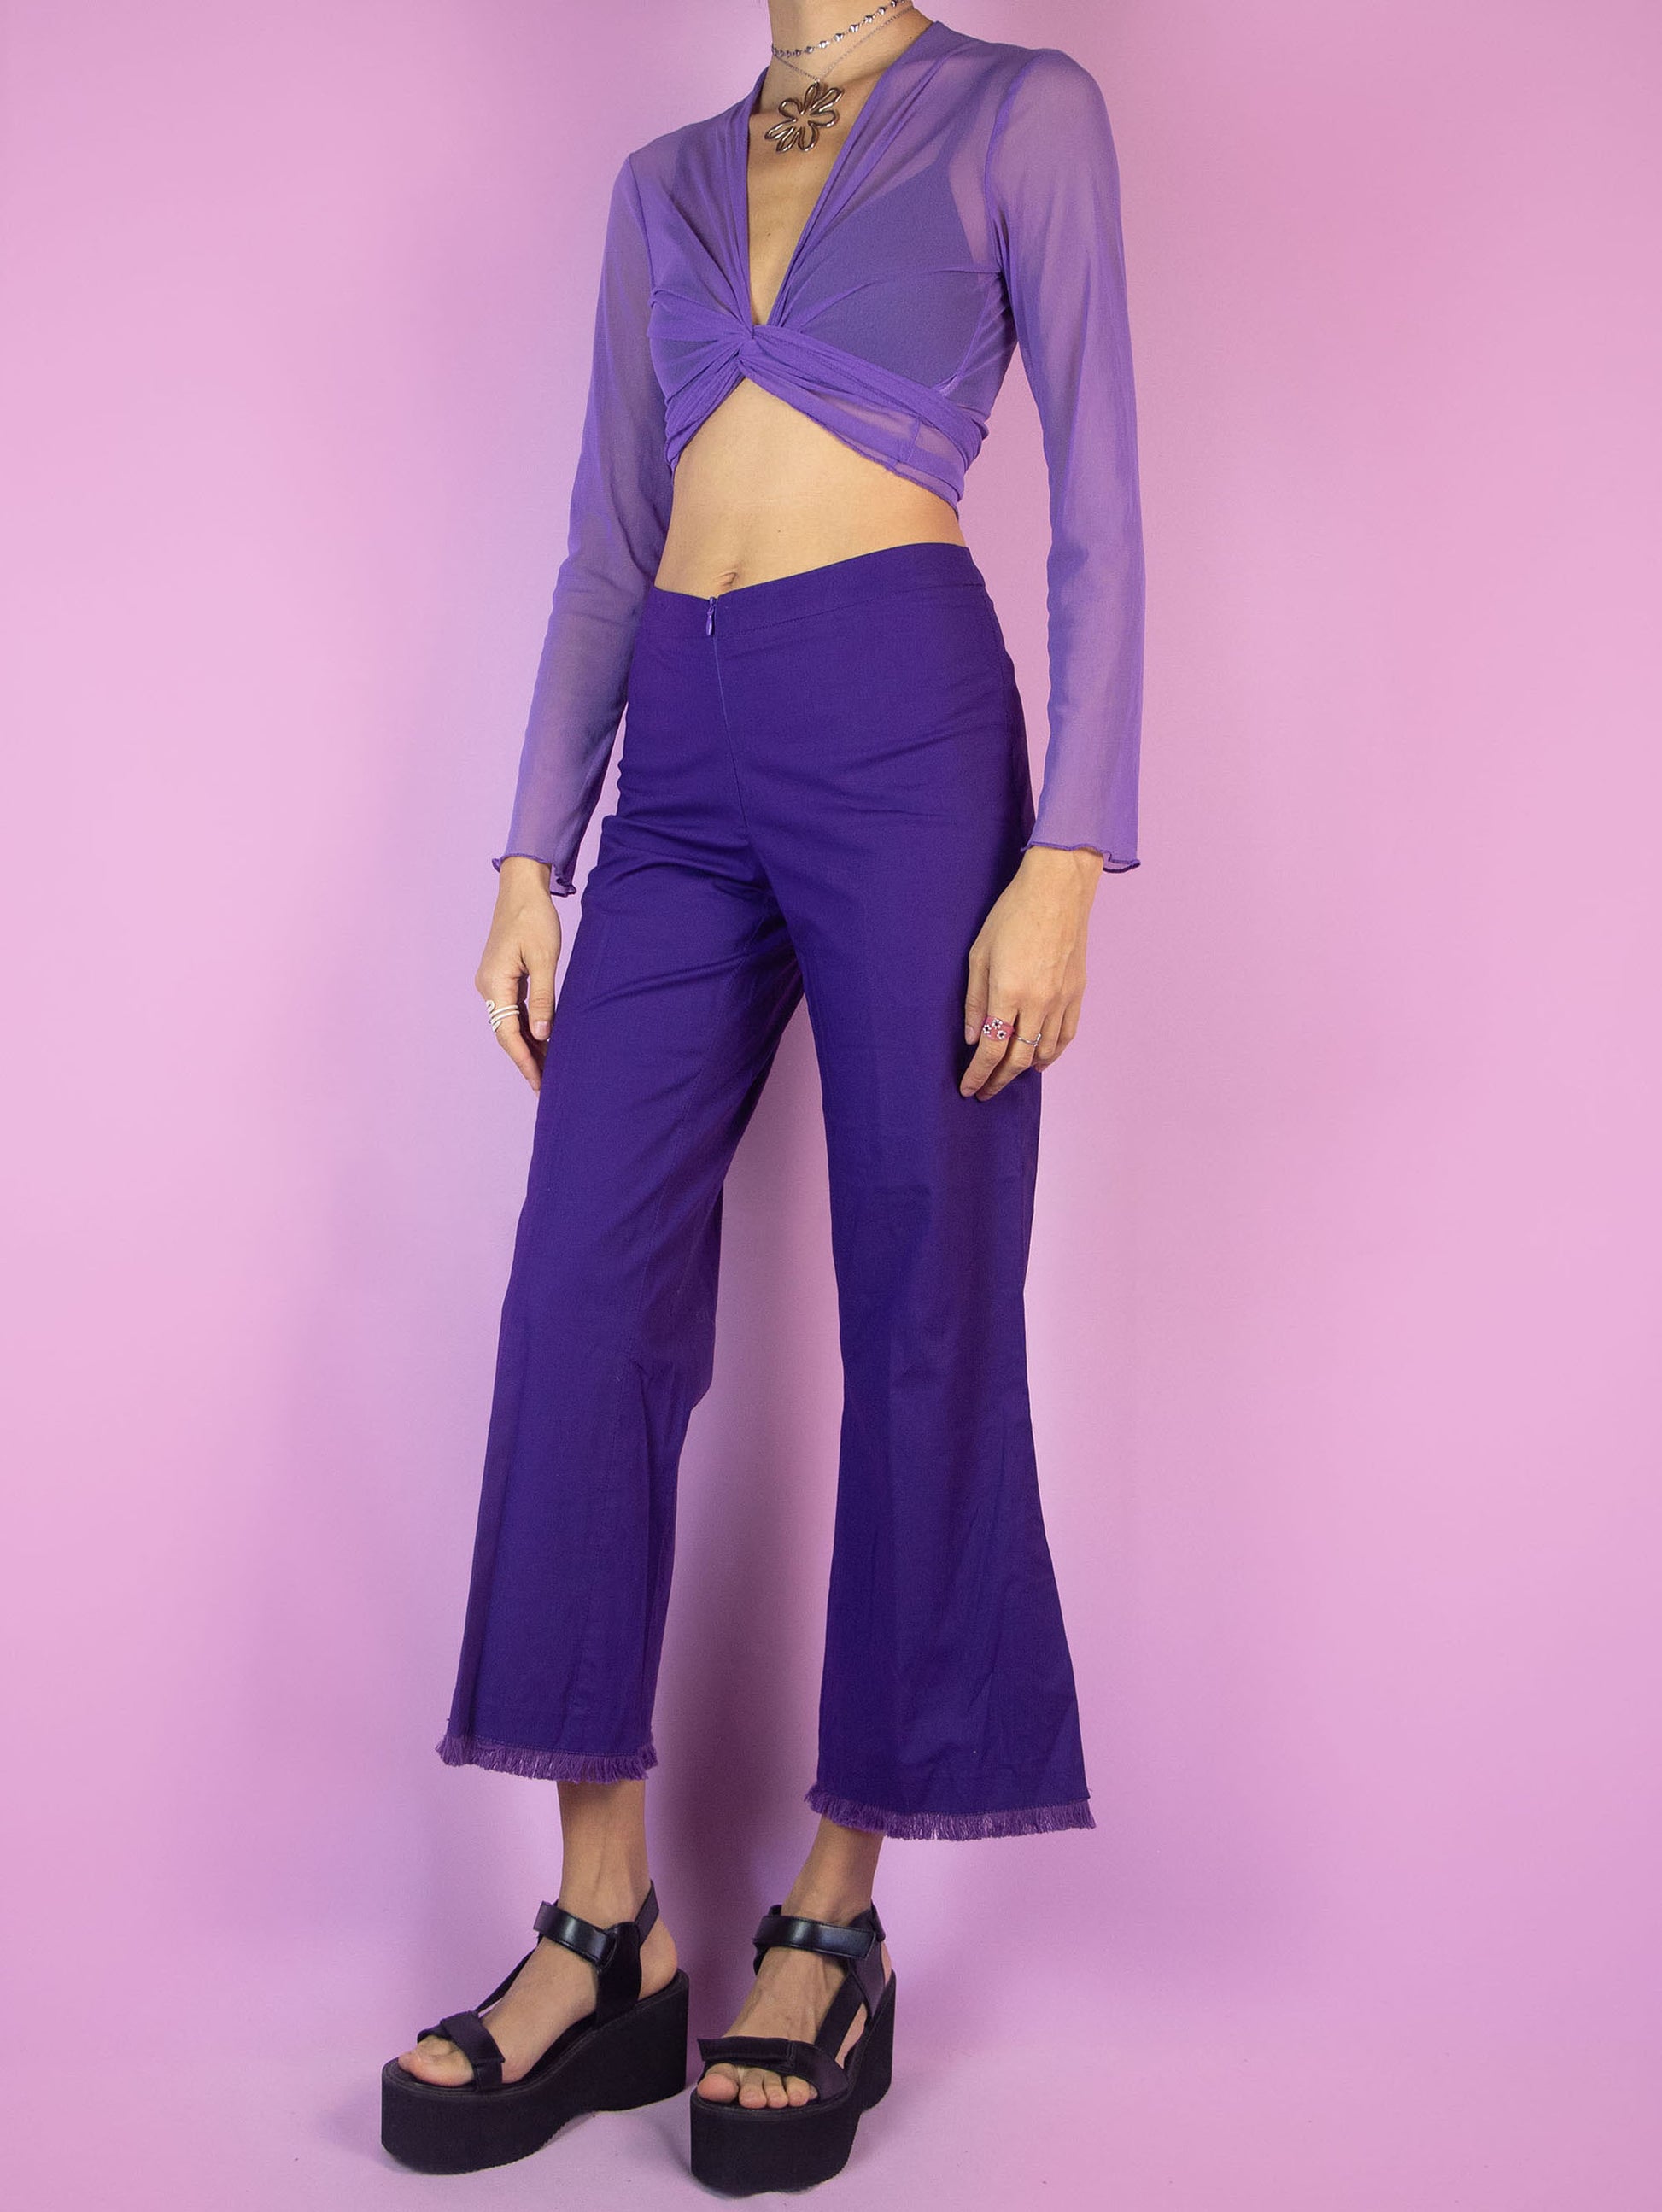 The Y2K Purple Cropped Capri Pants are vintage dark purple slightly elastic pants with a front zipper closure, featuring slits at the hem and frayed fringe. Cyber 2000s boho summer trousers.